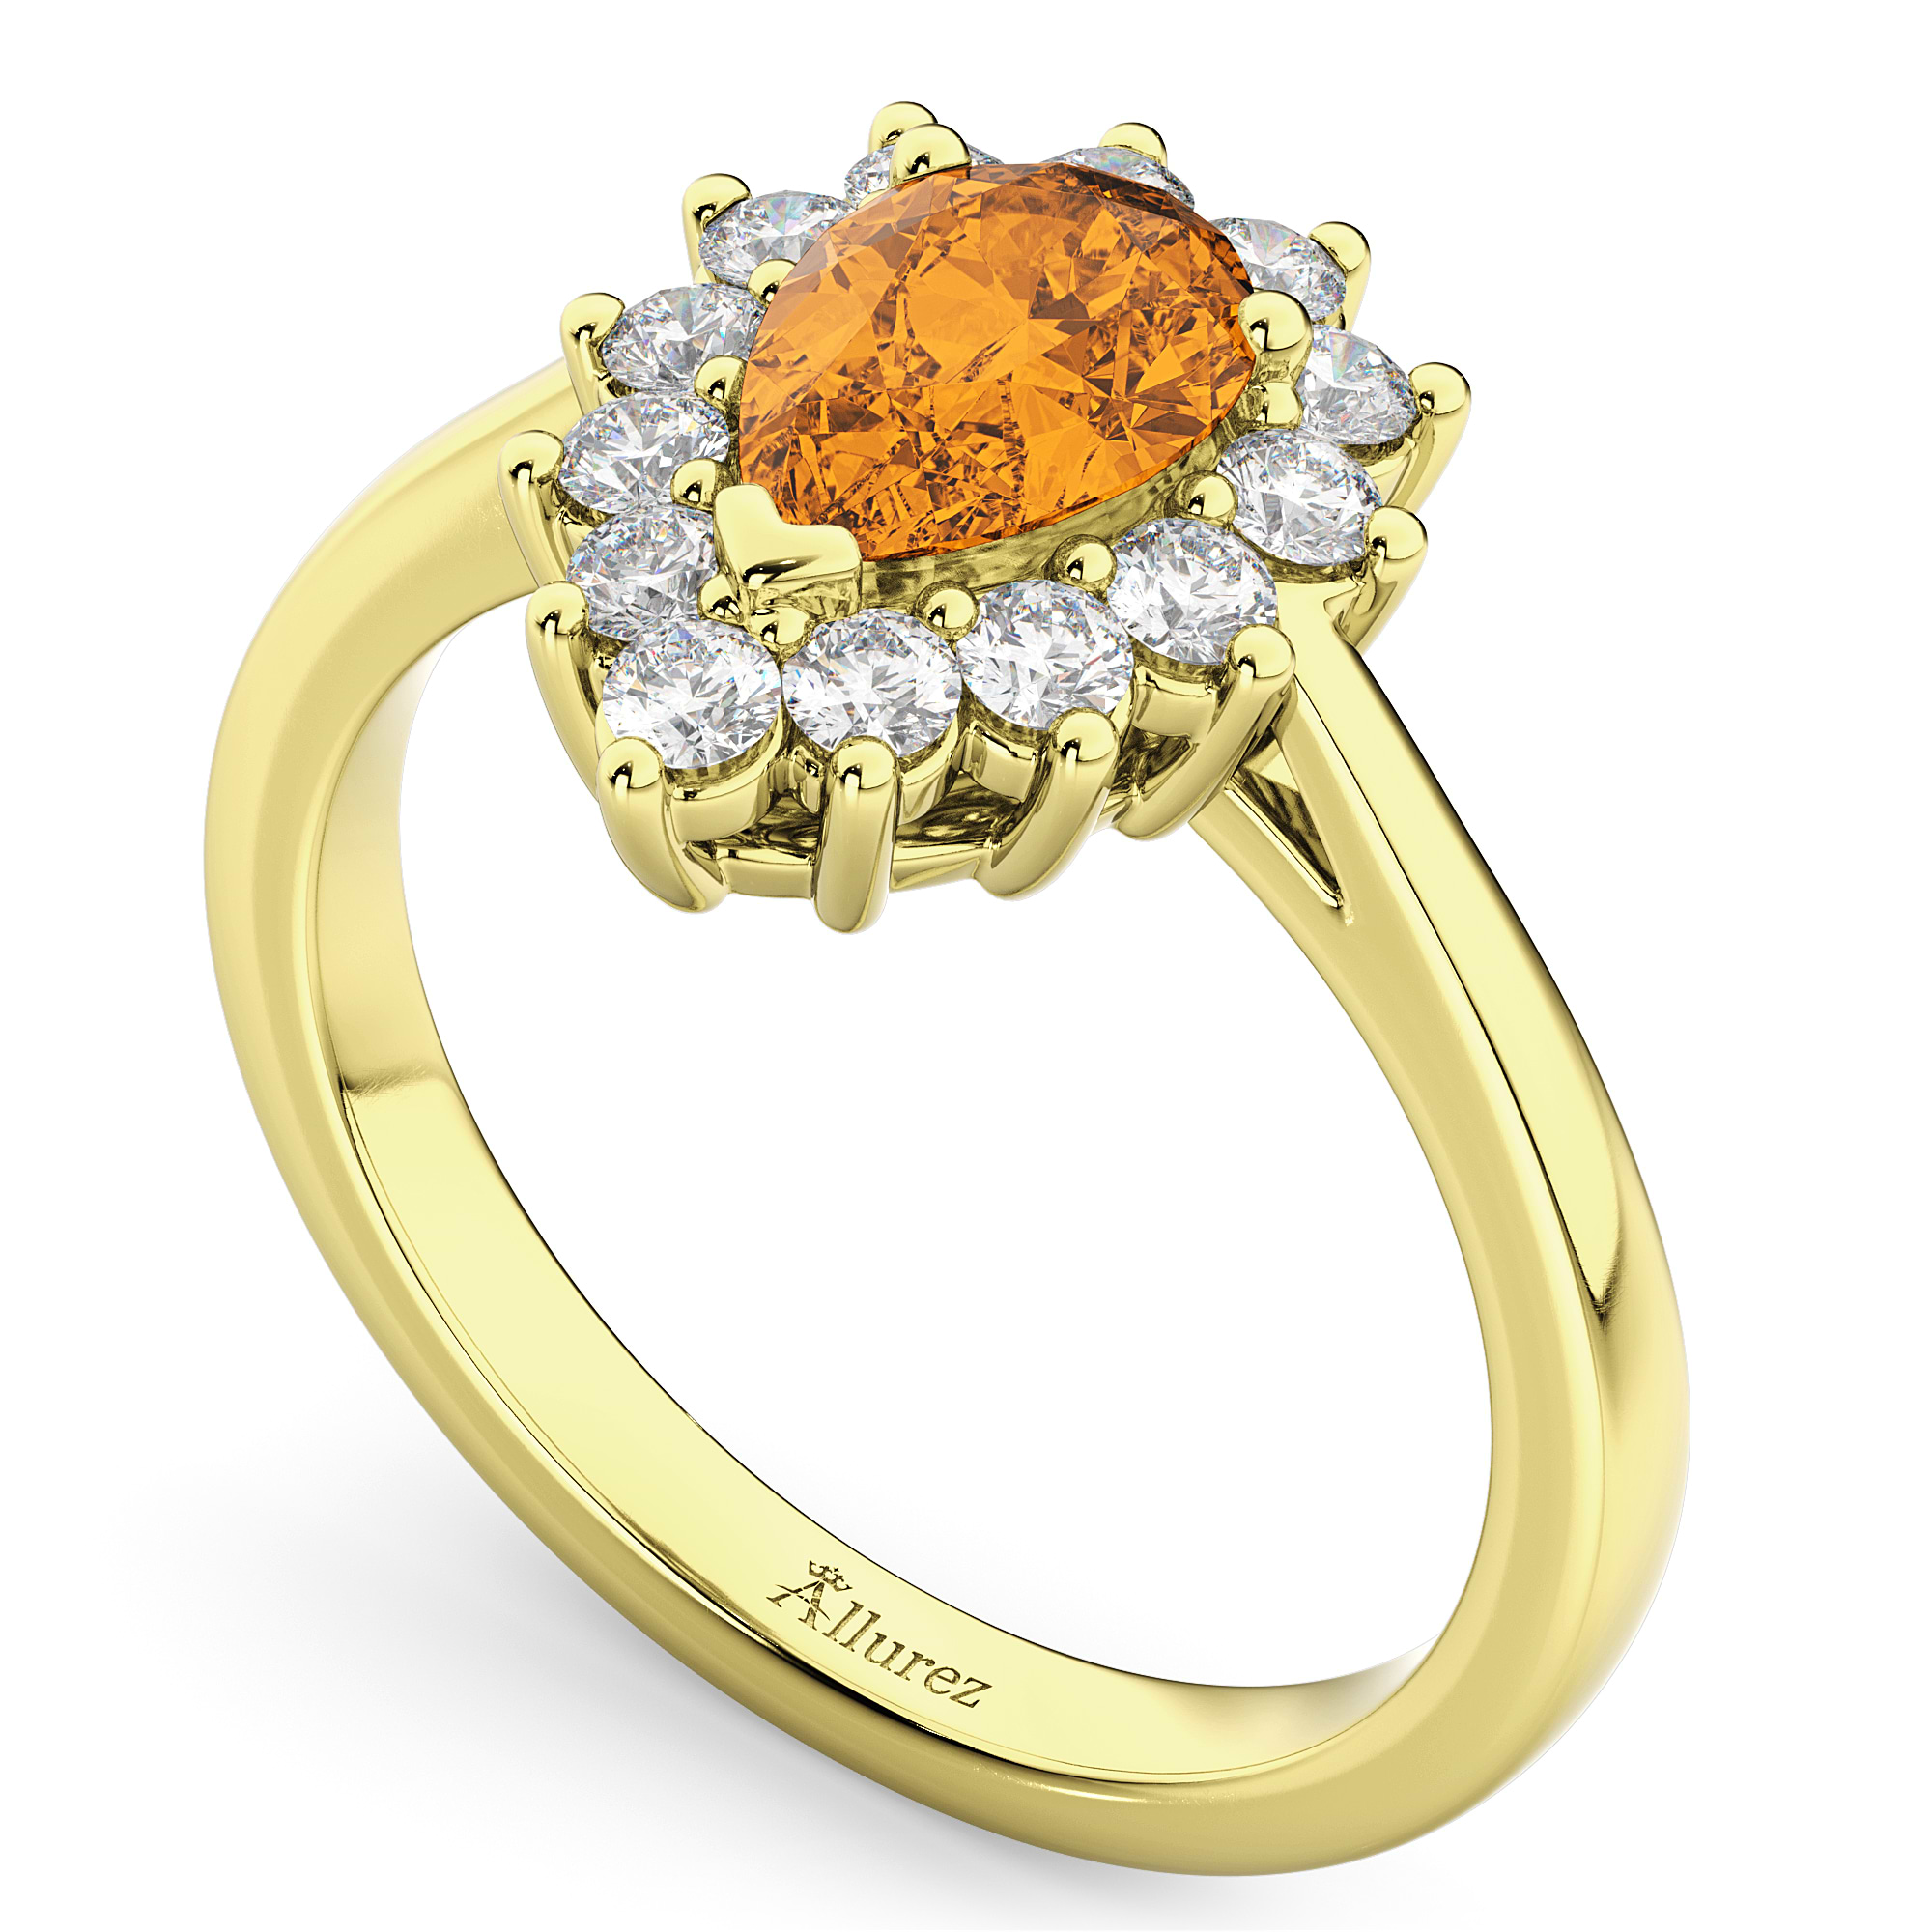 Halo Citrine & Diamond Floral Pear Shaped Fashion Ring 14k Yellow Gold (1.07ct)